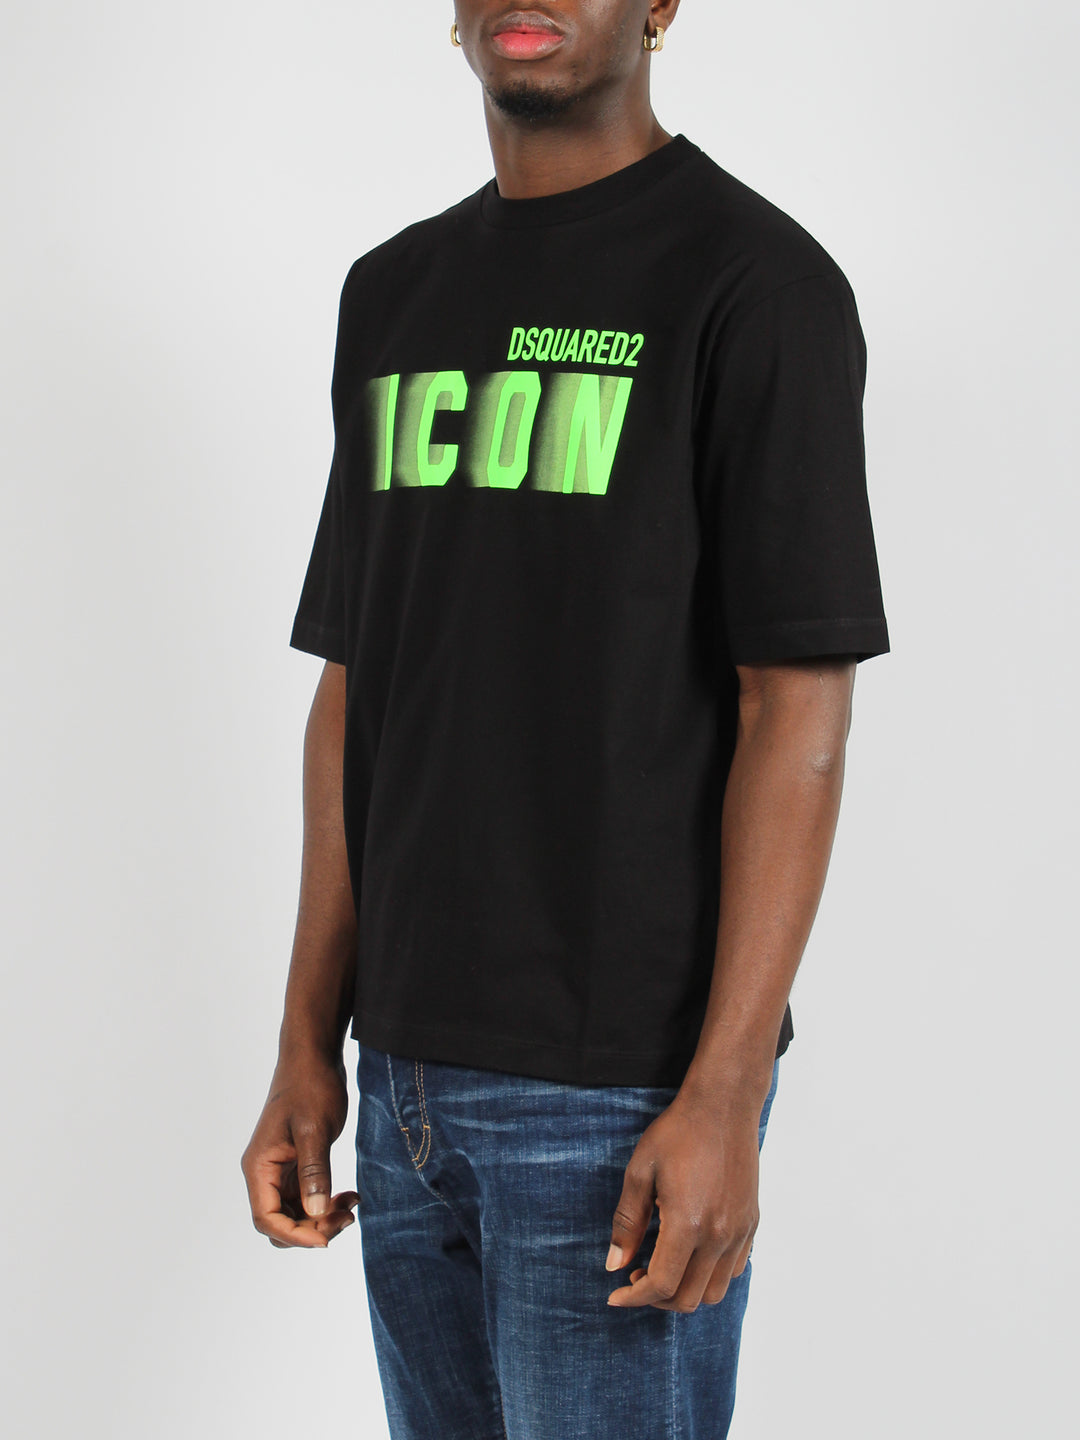 Icon blur loose fit t-shirt